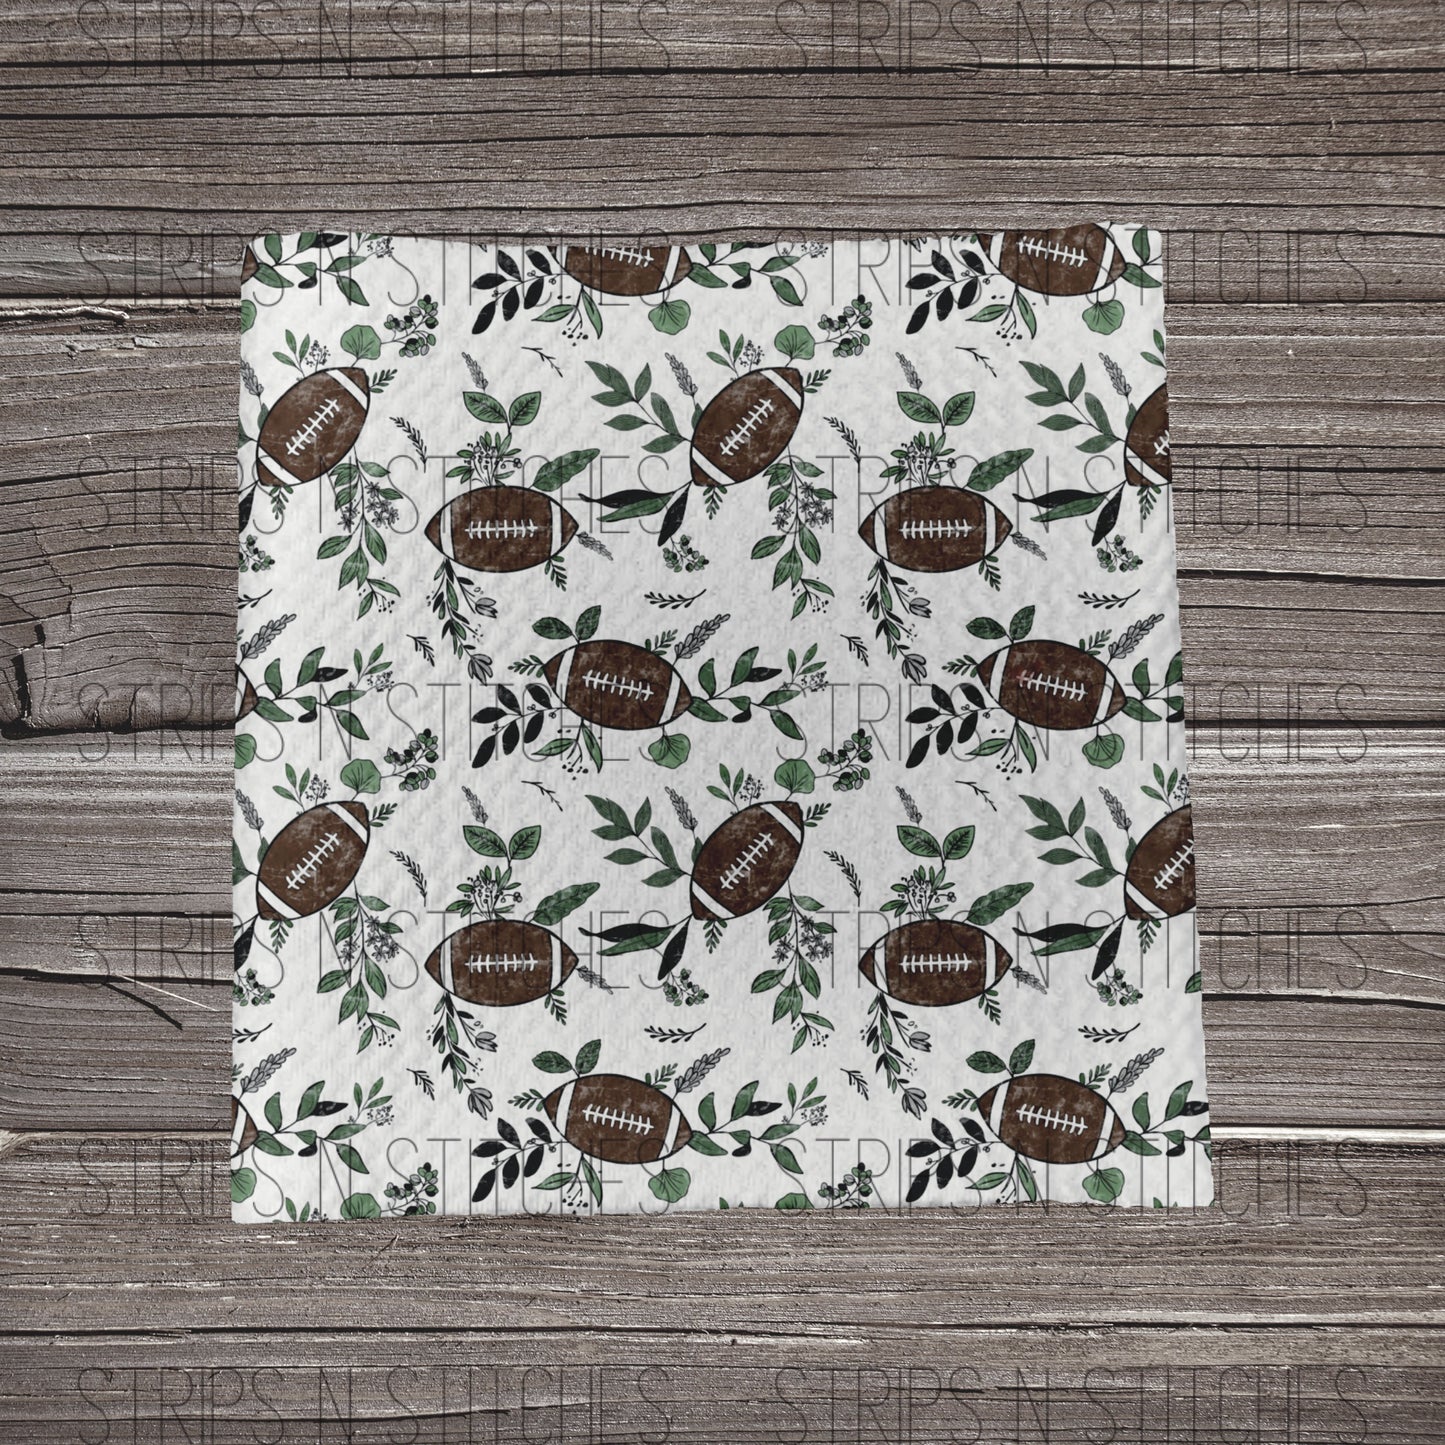 Floral Football | Bullet Fabric Strip | Bow Making | Scrunchie |